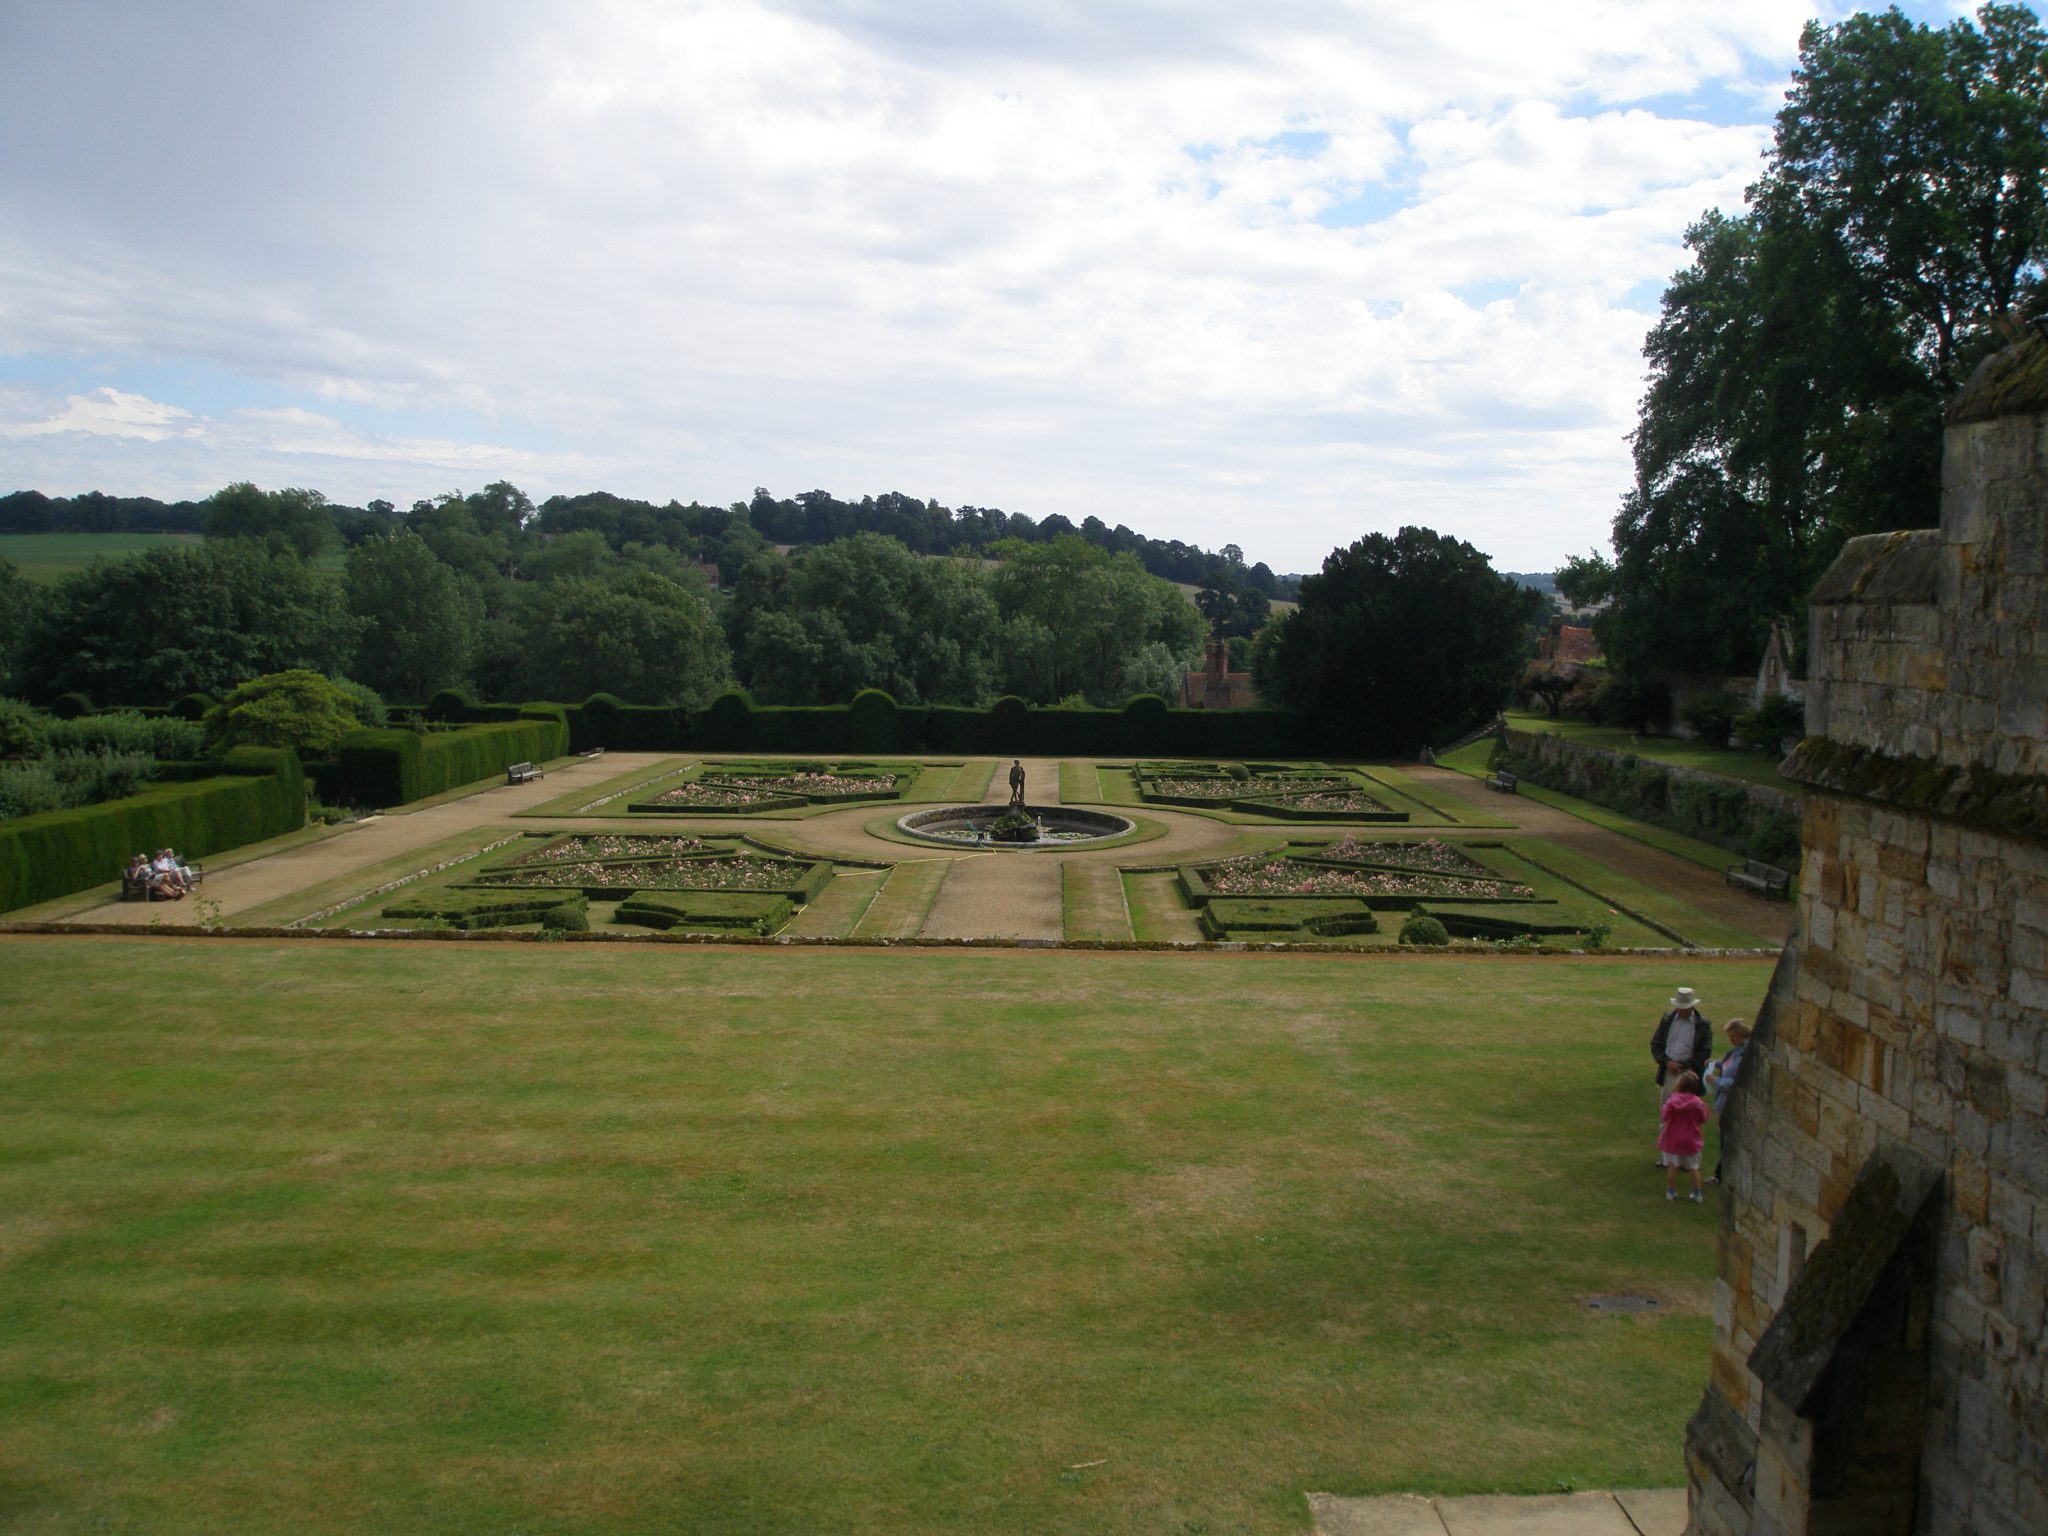 A view across the Italian Garden, from the South Lawn